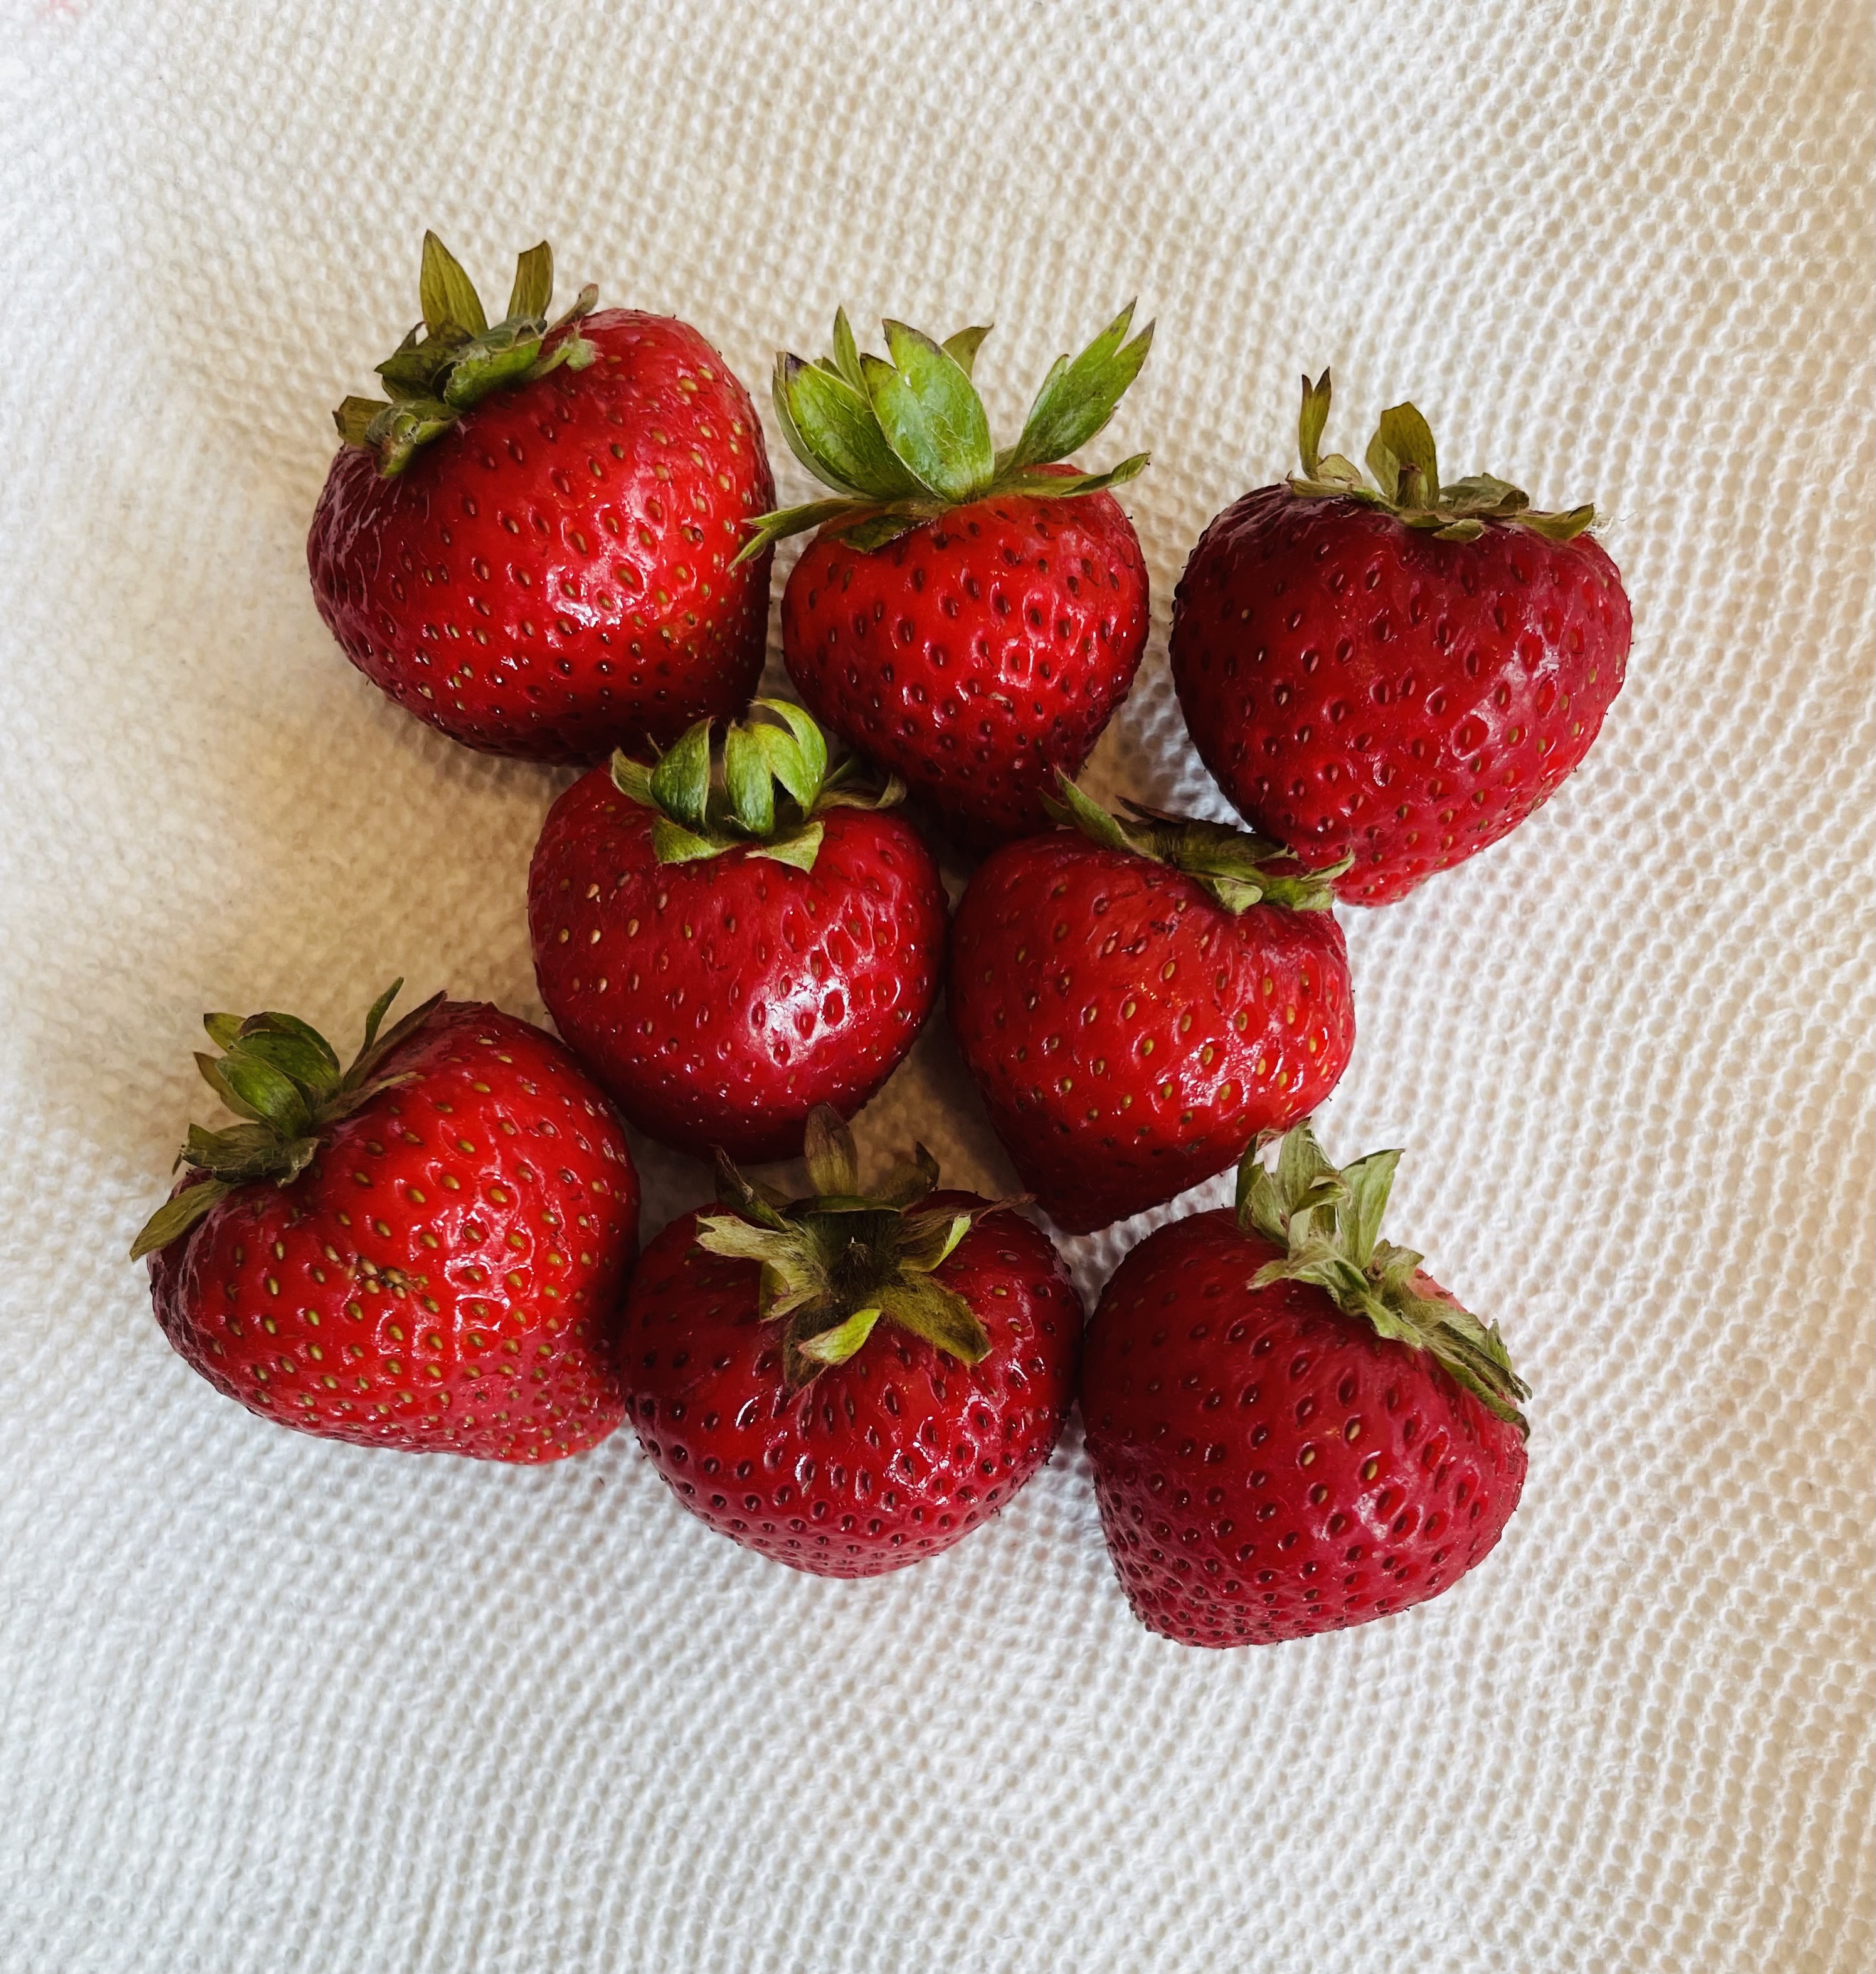 Selecting the best strawberries 